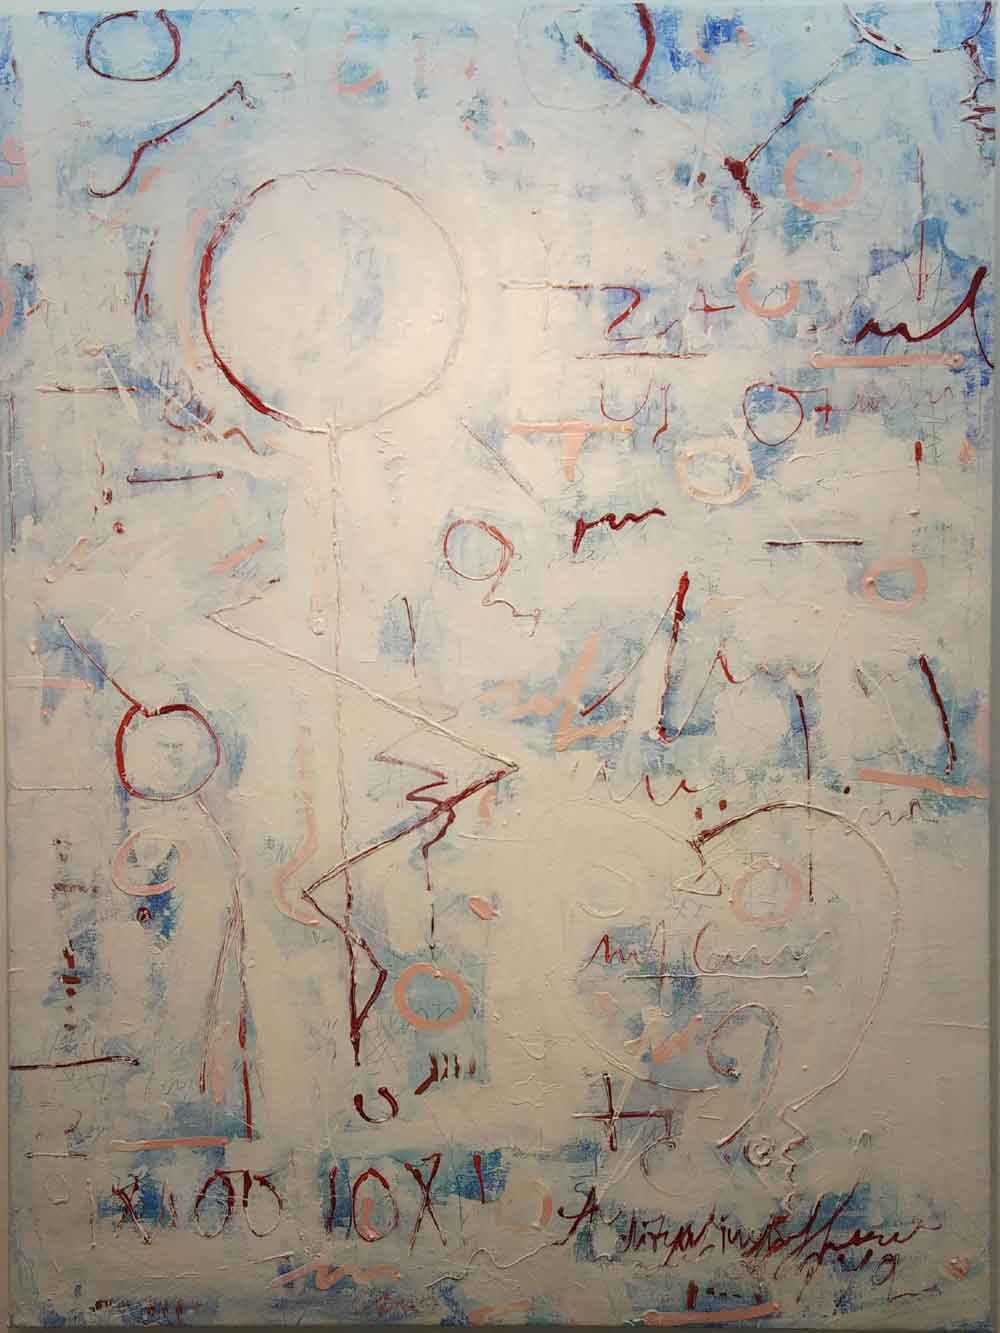 Abstract Painting with Mixed Media on Canvas "Story - 3" art by Aditya Singh Thakur